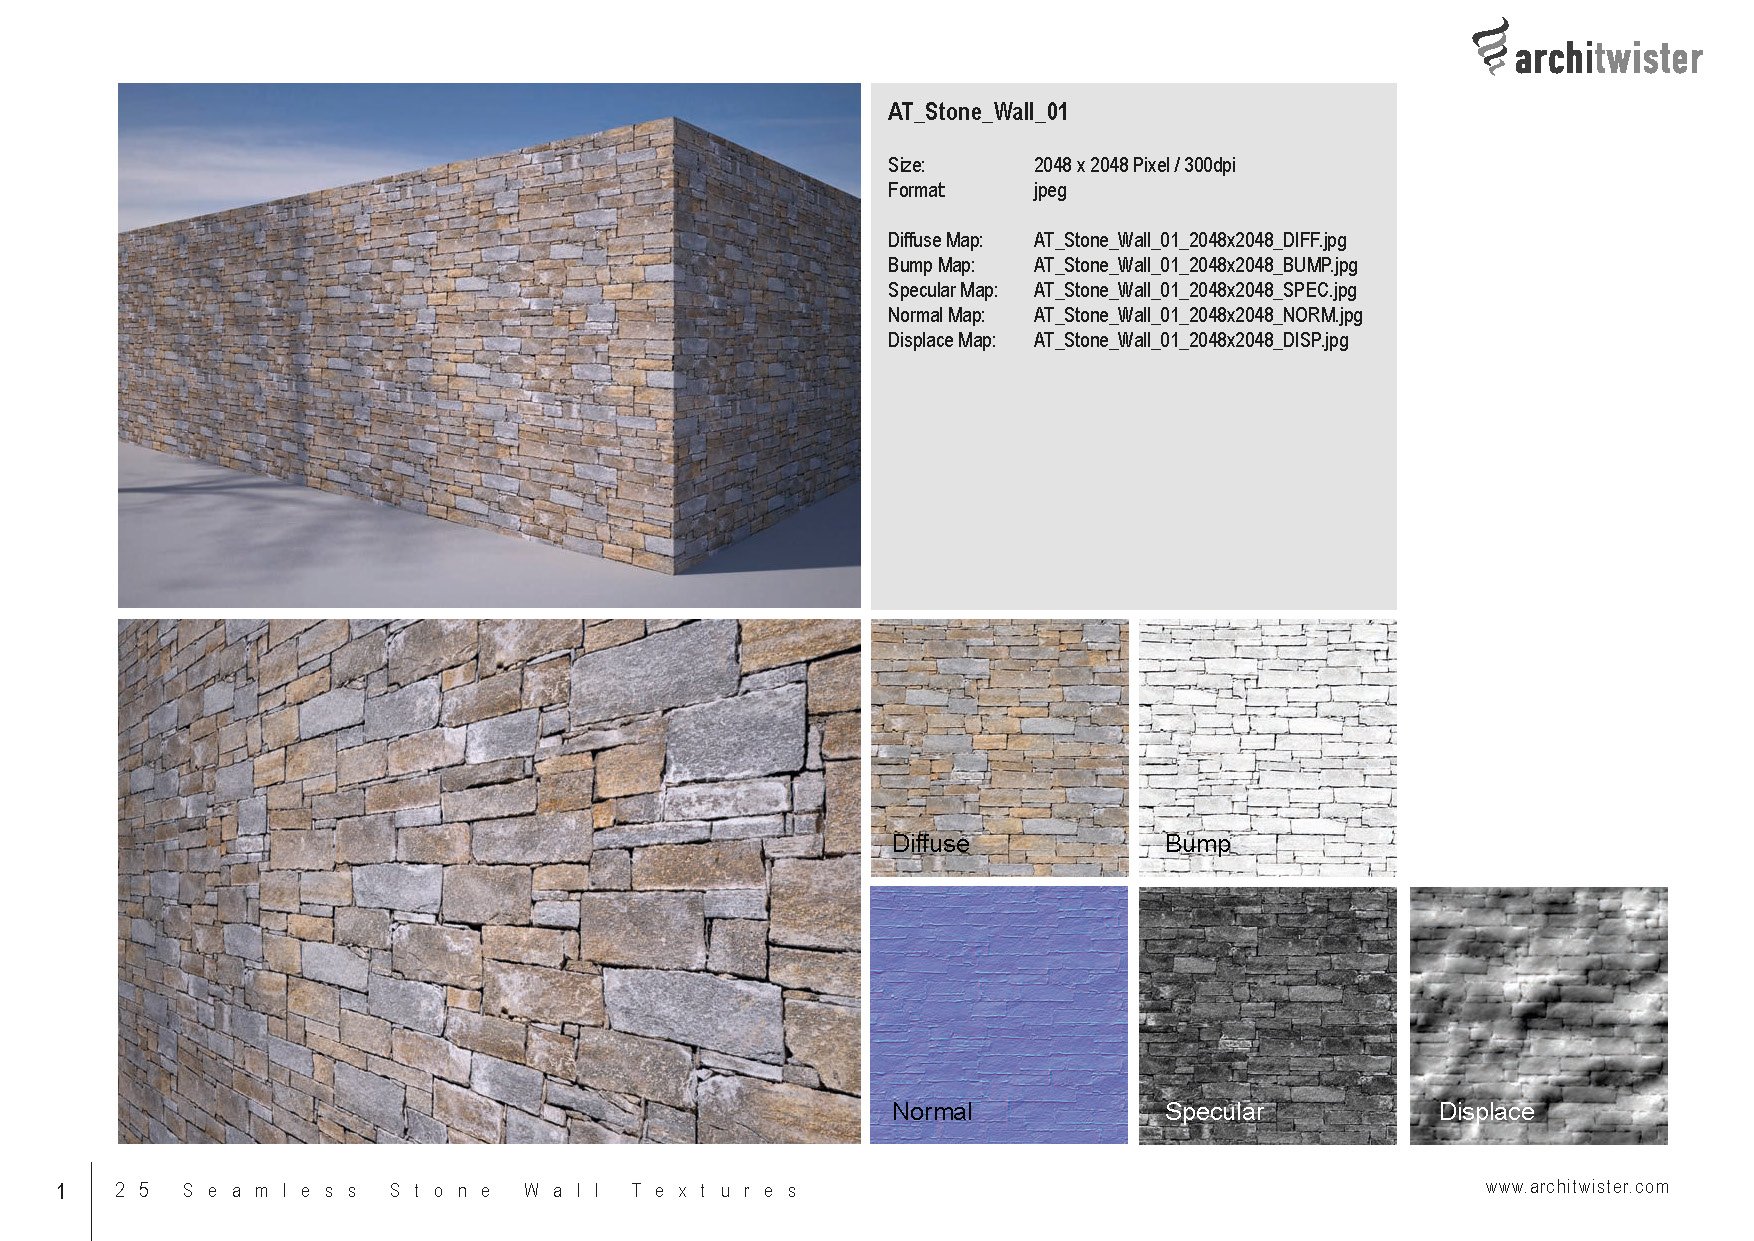 at stone wall textures catalog 01 seite 02 406